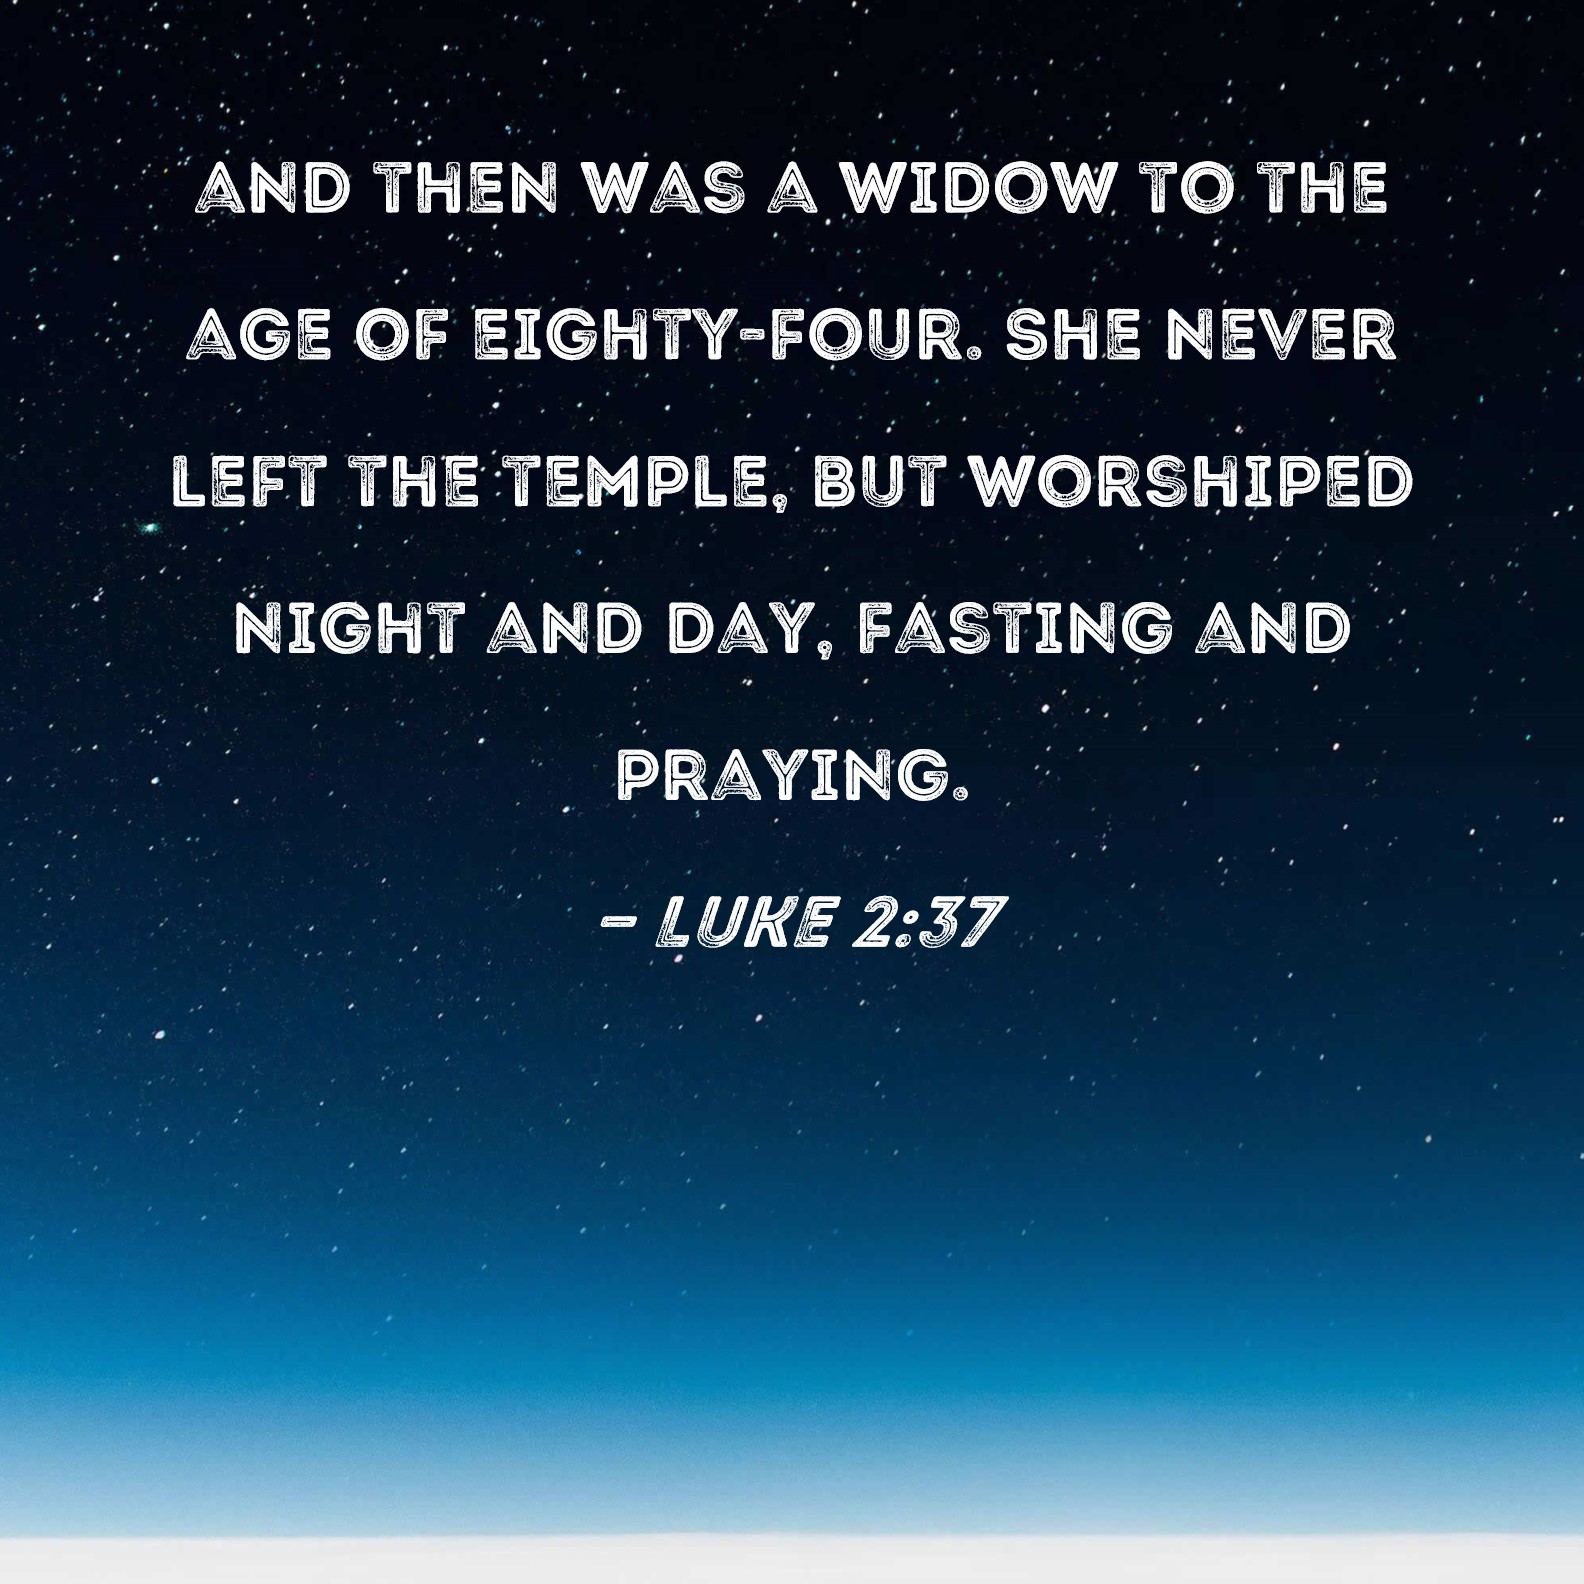 Luke 2:37 and then was a widow to the age of eighty-four. She never left  the temple, but worshiped night and day, fasting and praying.